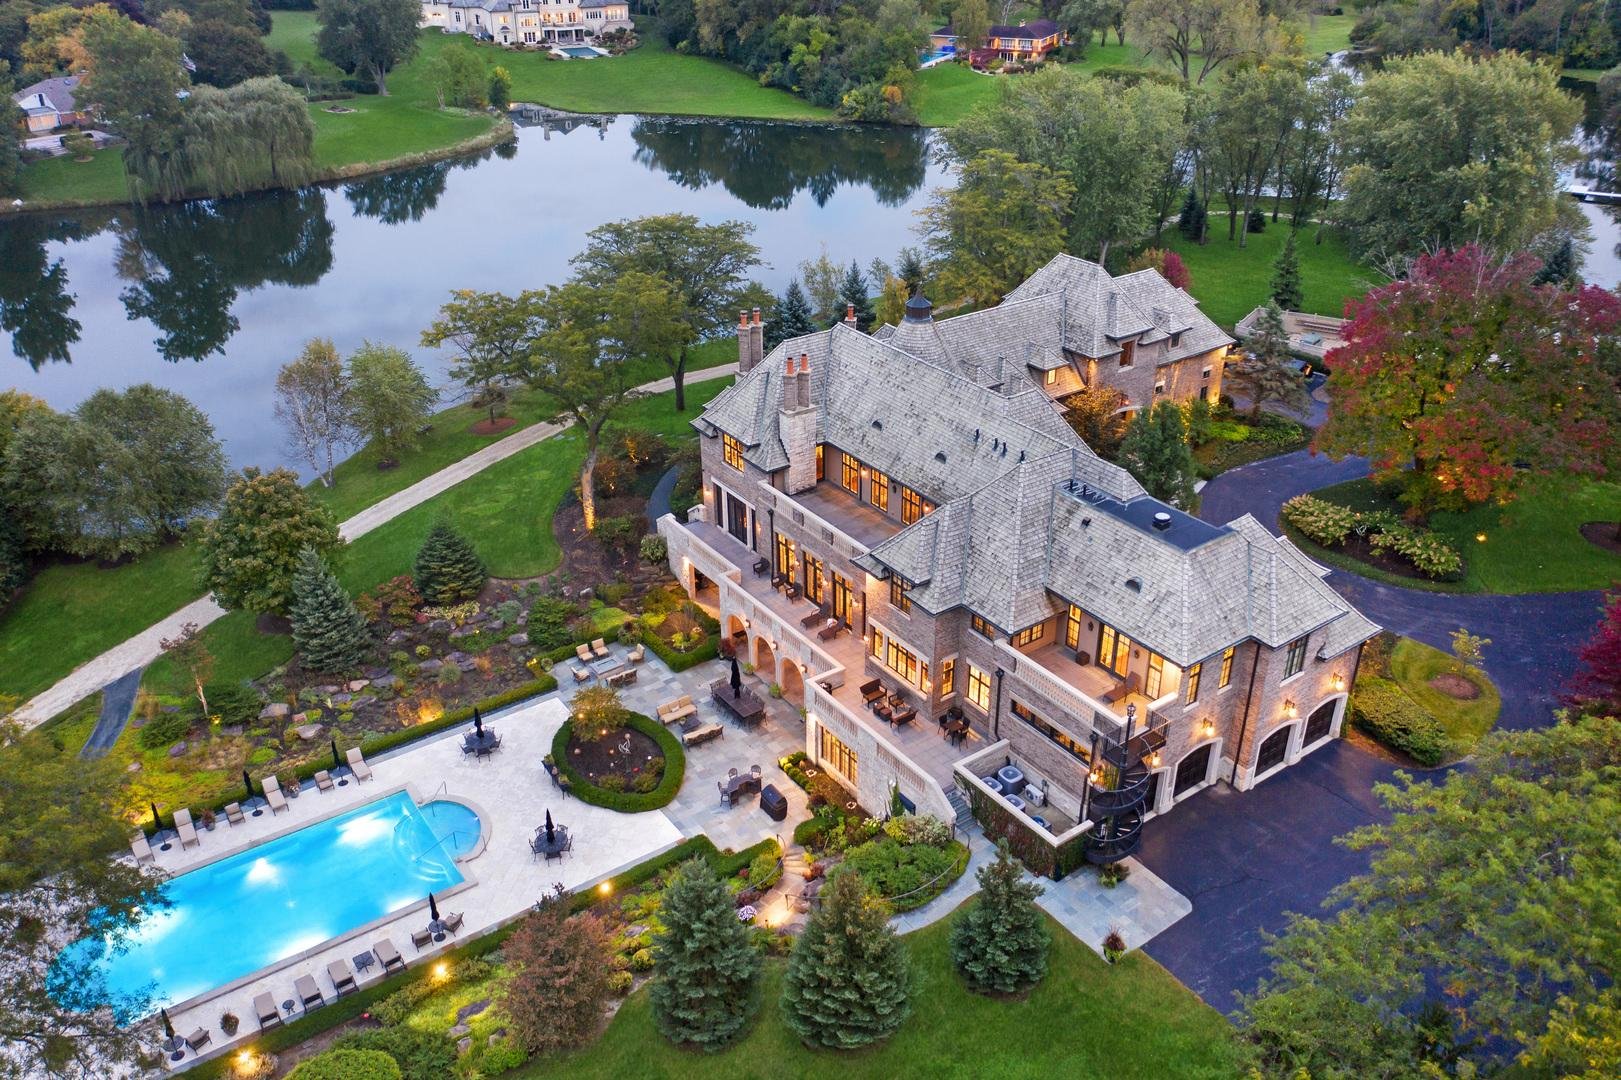 Francis York One of the Most Beautiful Homes For Sale in Illinois 12.jpg